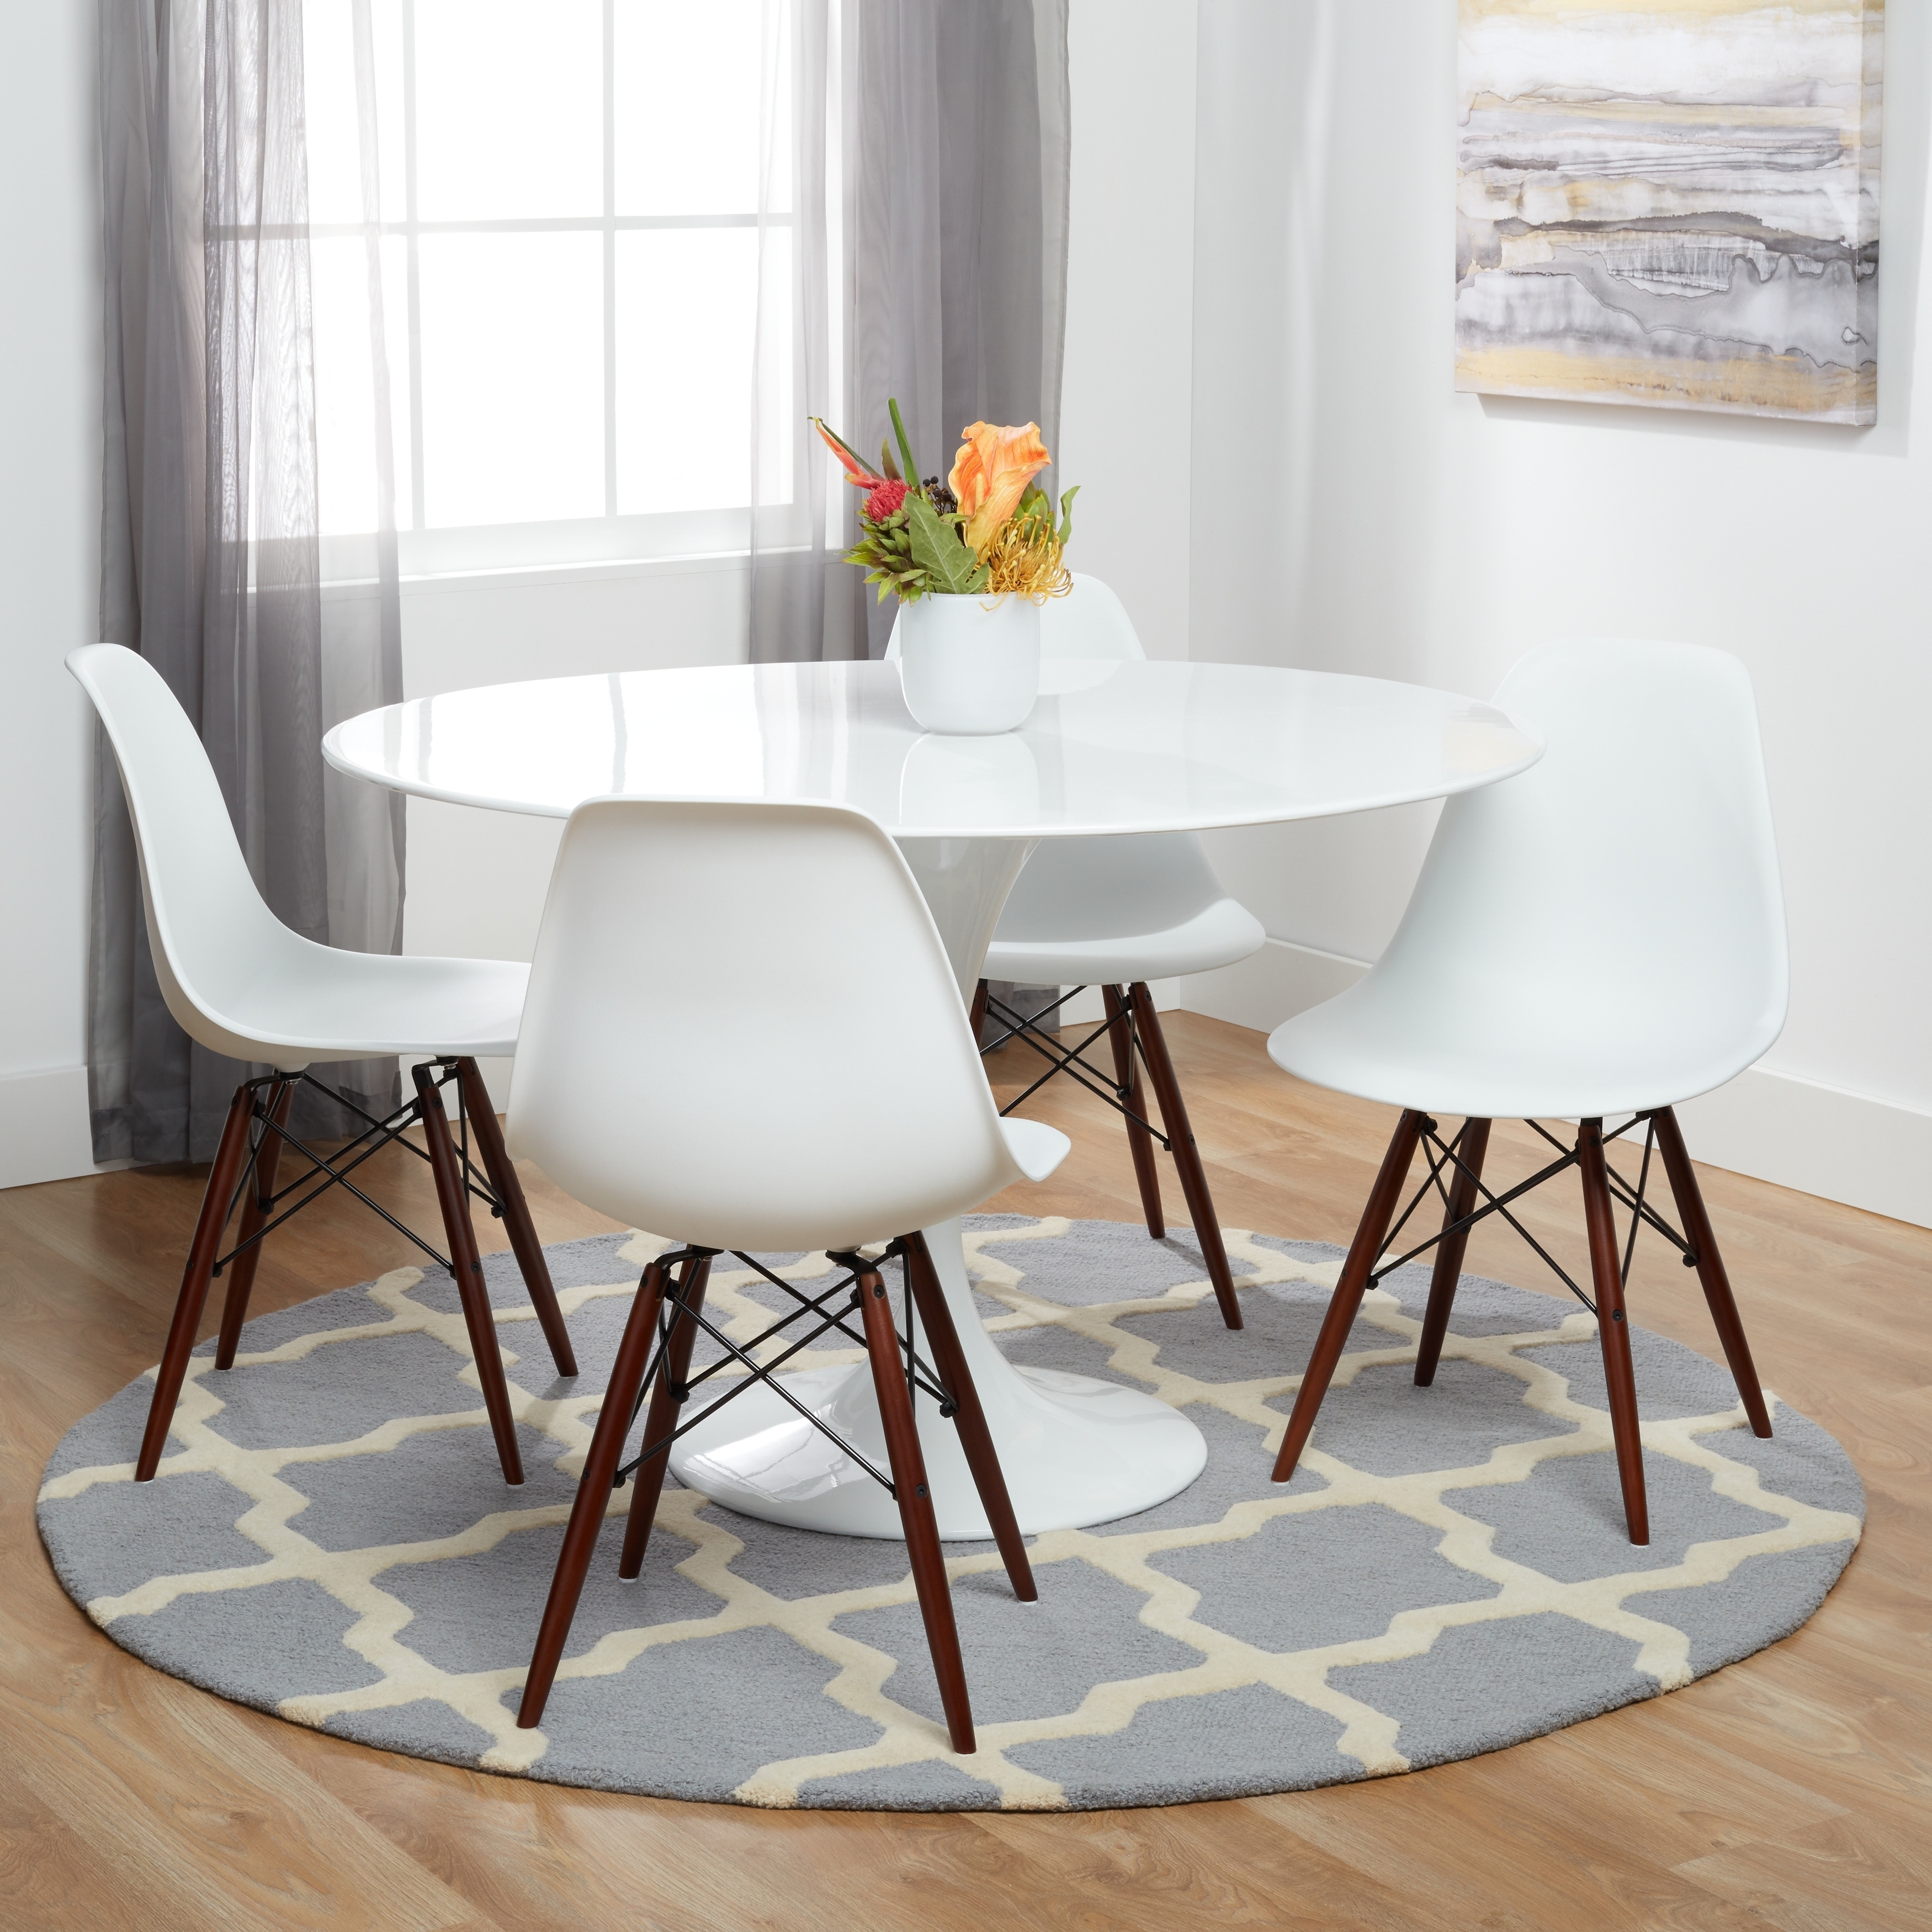 Buy Modern Contemporary Kitchen Dining Room Chairs Online At